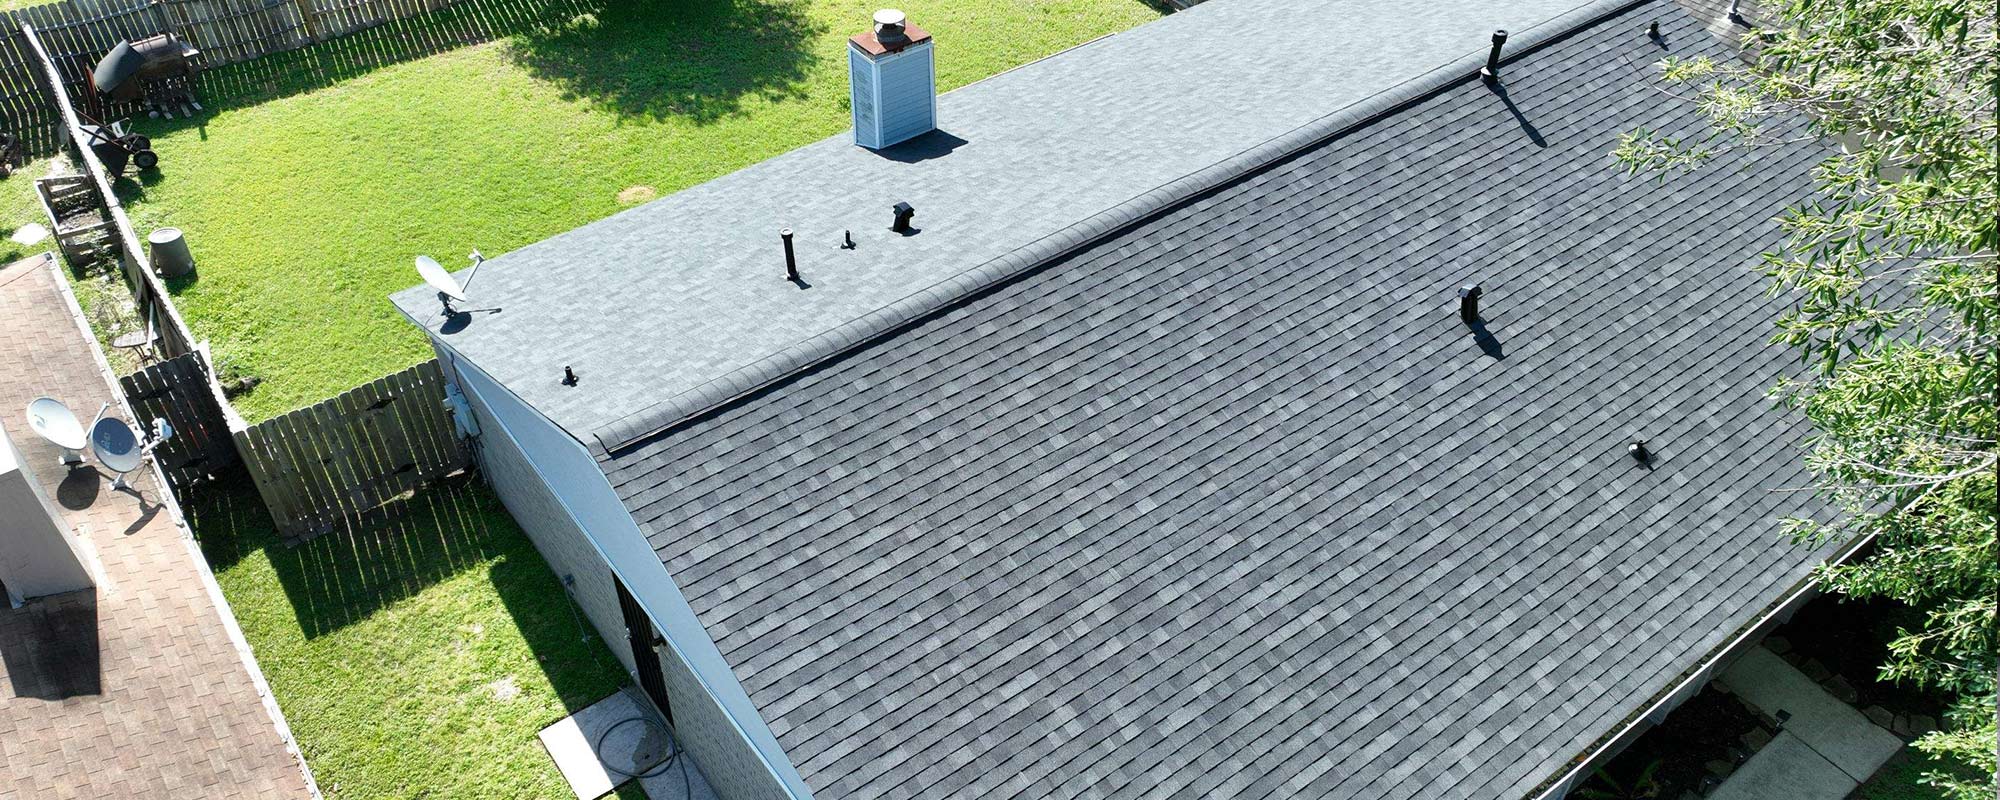 best asphalt shingle roof repair and replacement company Houston